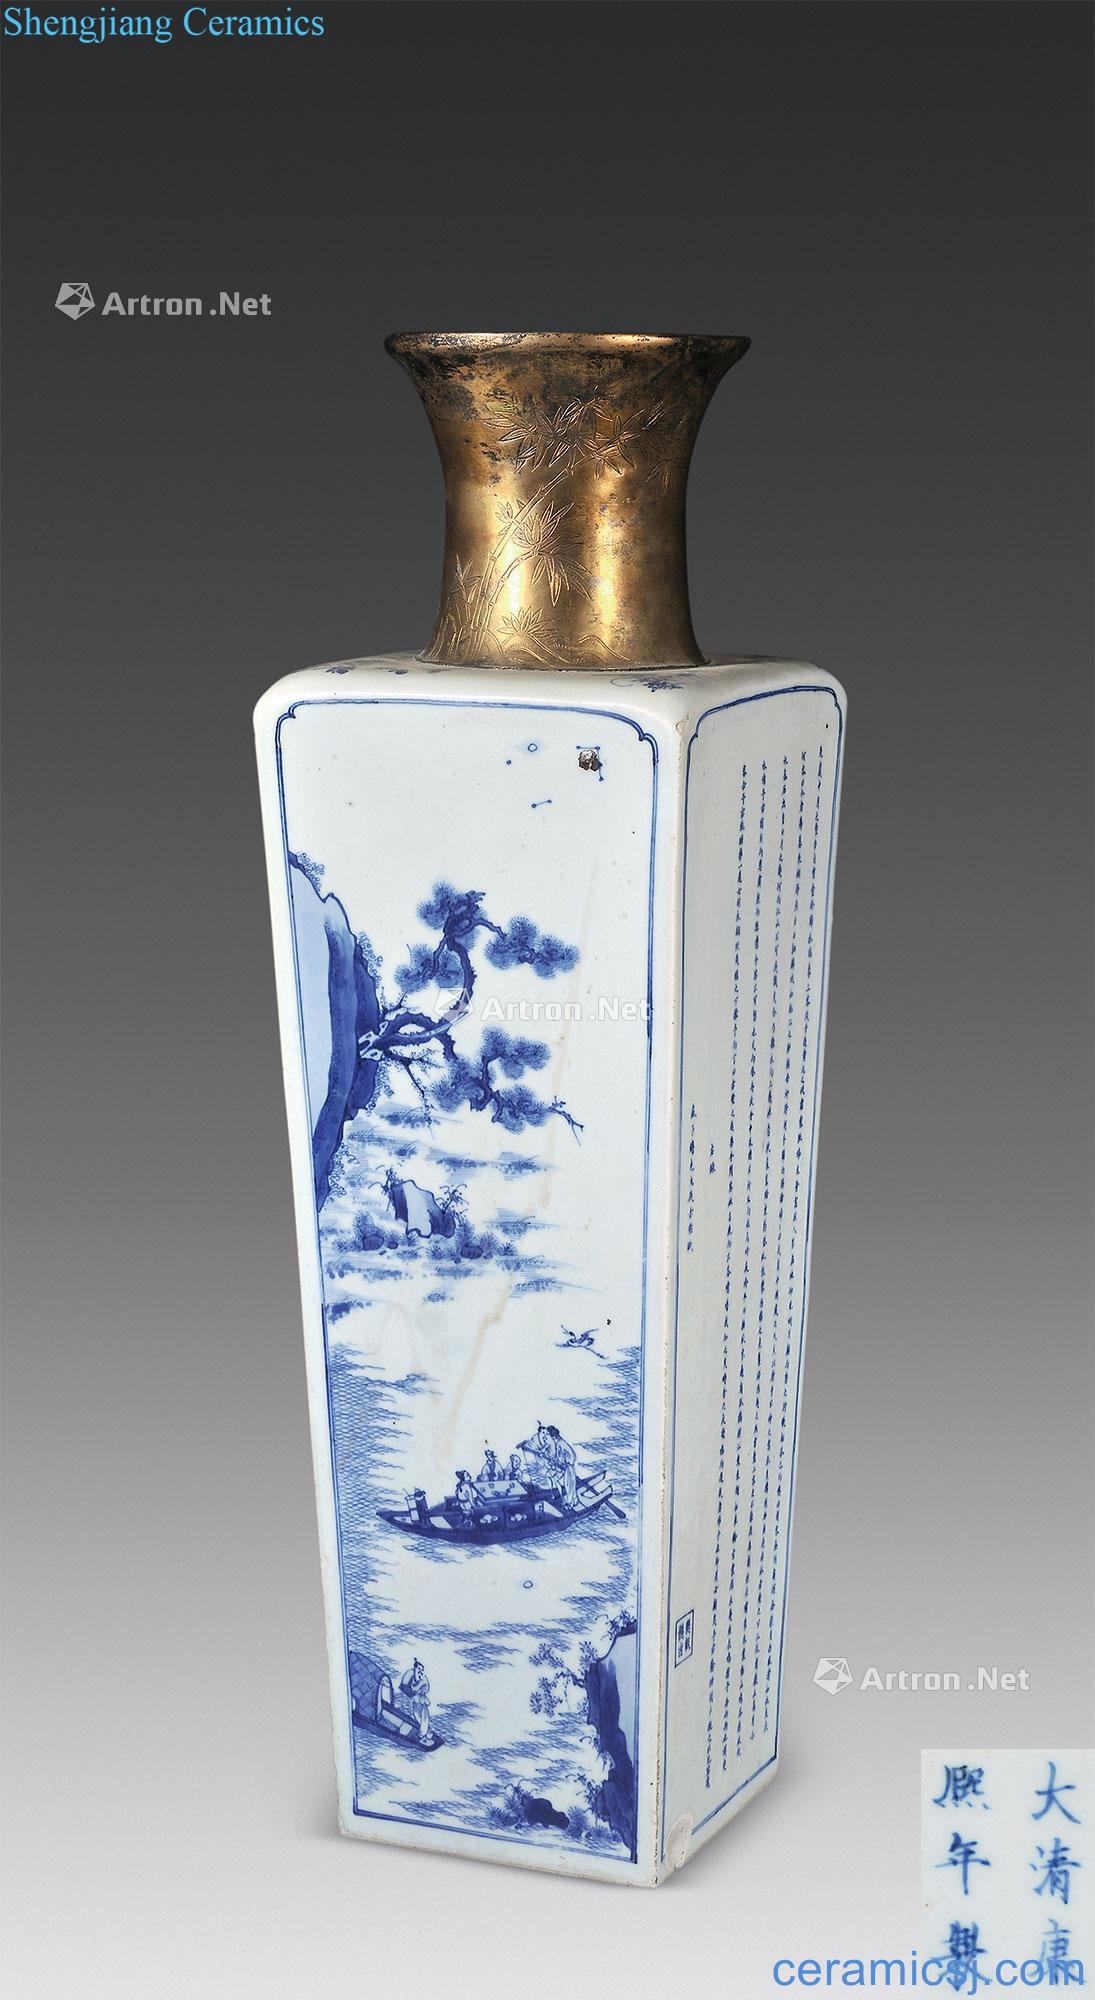 The qing emperor kangxi Blue and white literary landscape character poems bottle nature round place